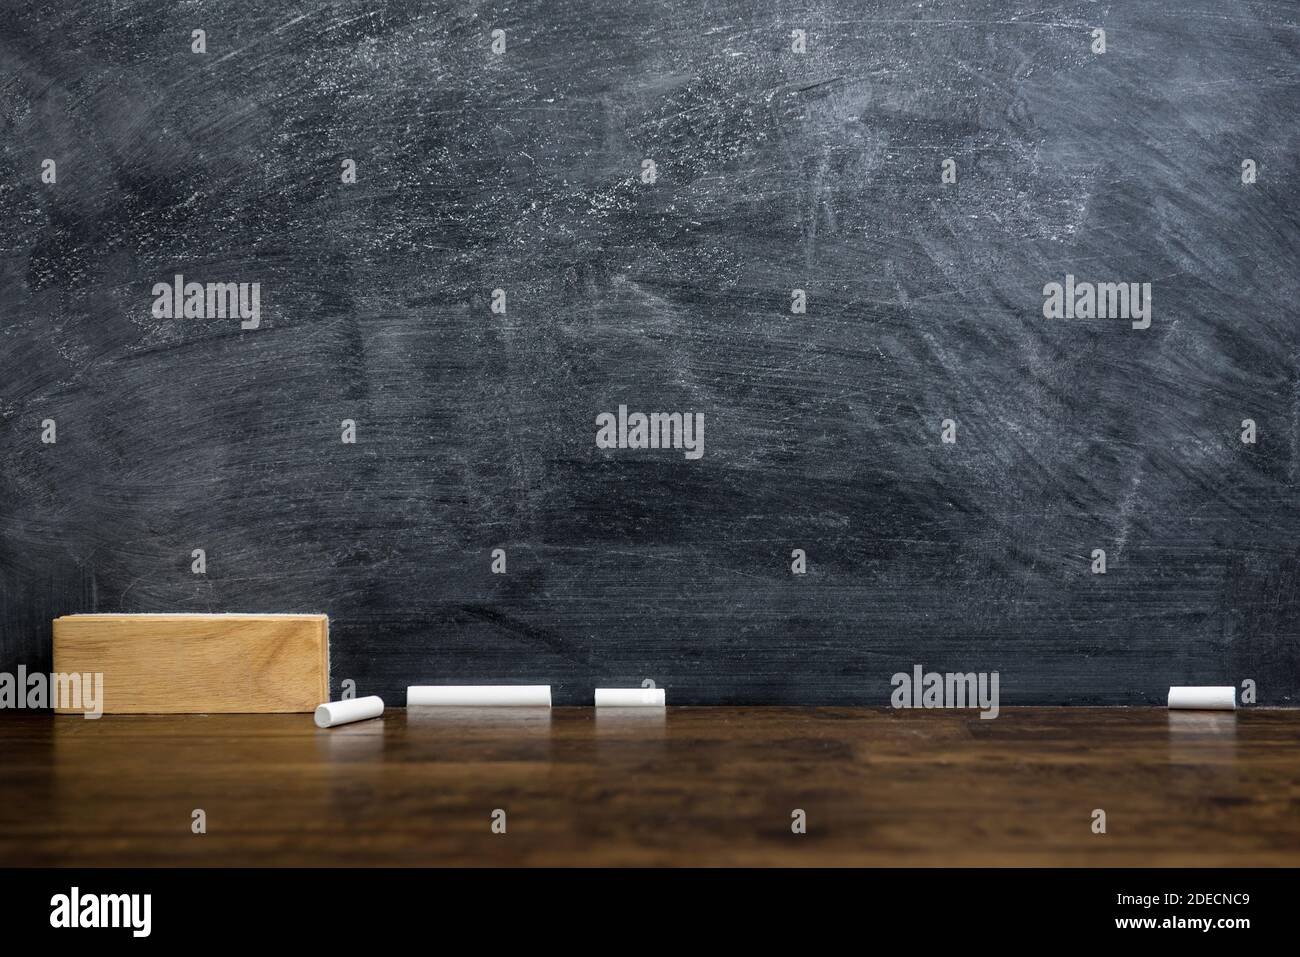 Empty blackboard or chalkboard with eraser and chalk on the table - education background concept Stock Photo